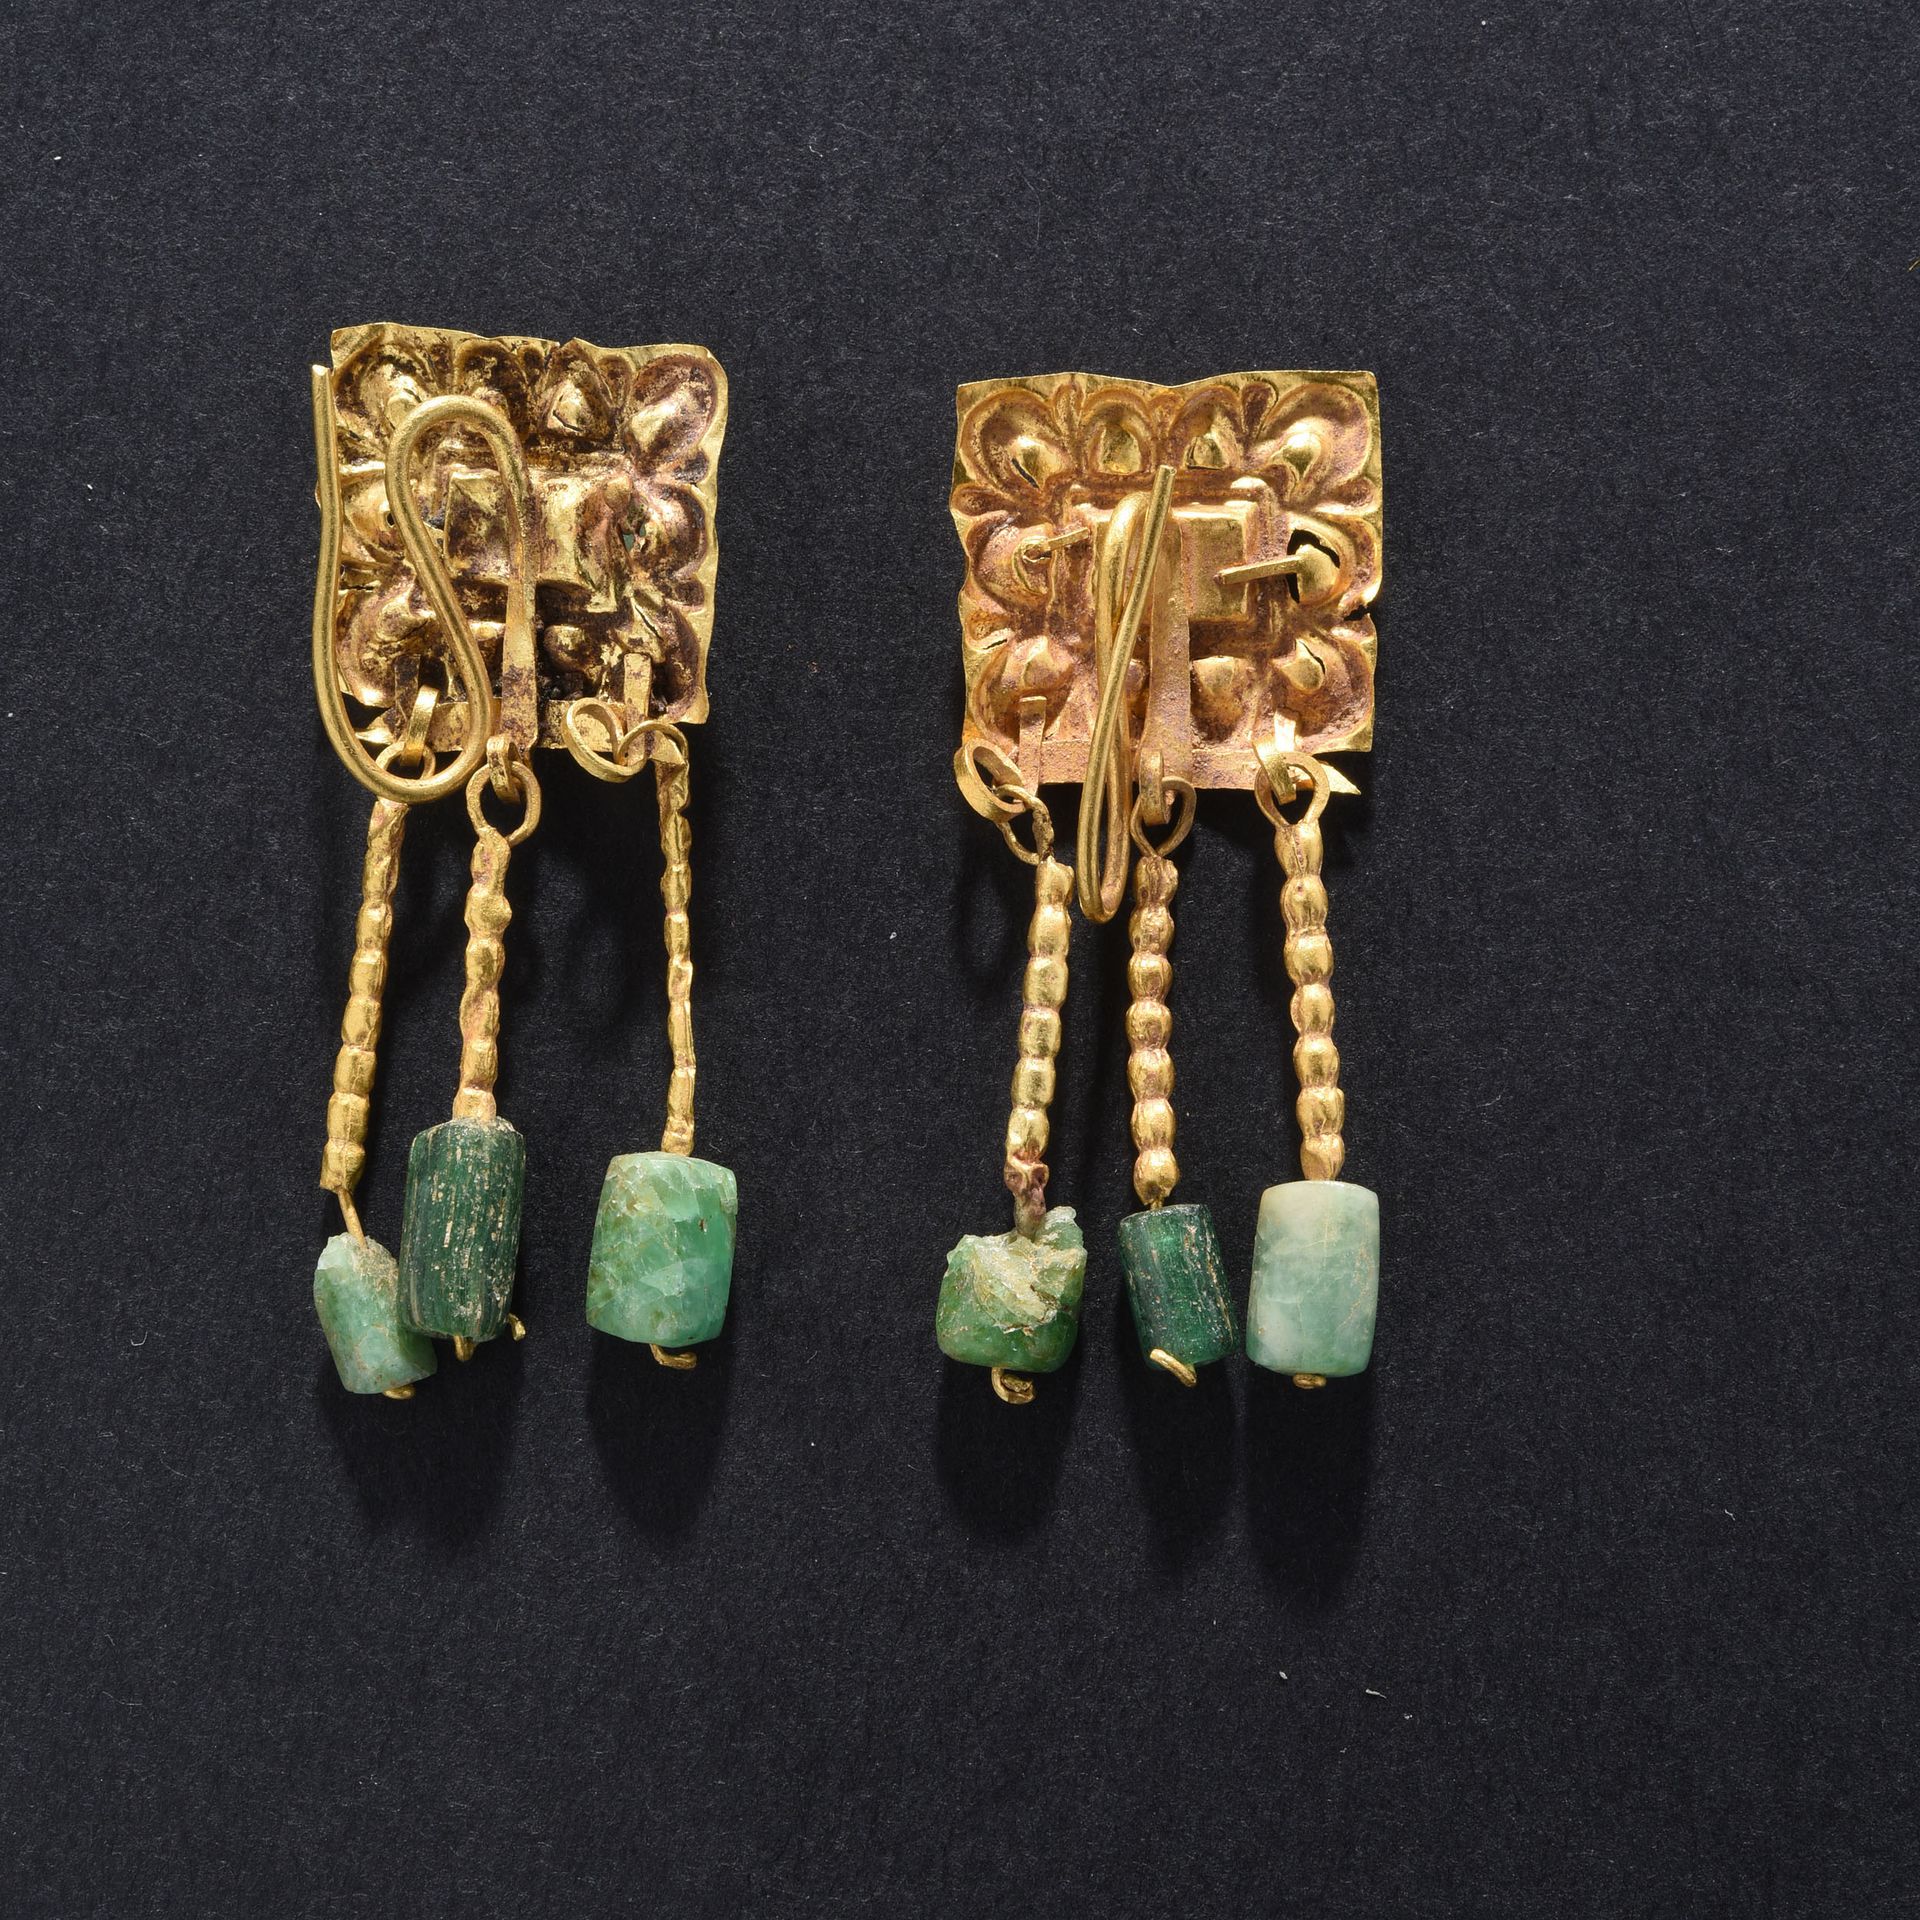 Null PAIR OF EARRINGS

Roman art, 2nd-3rd century.

Gold and chrysoprase and gla&hellip;